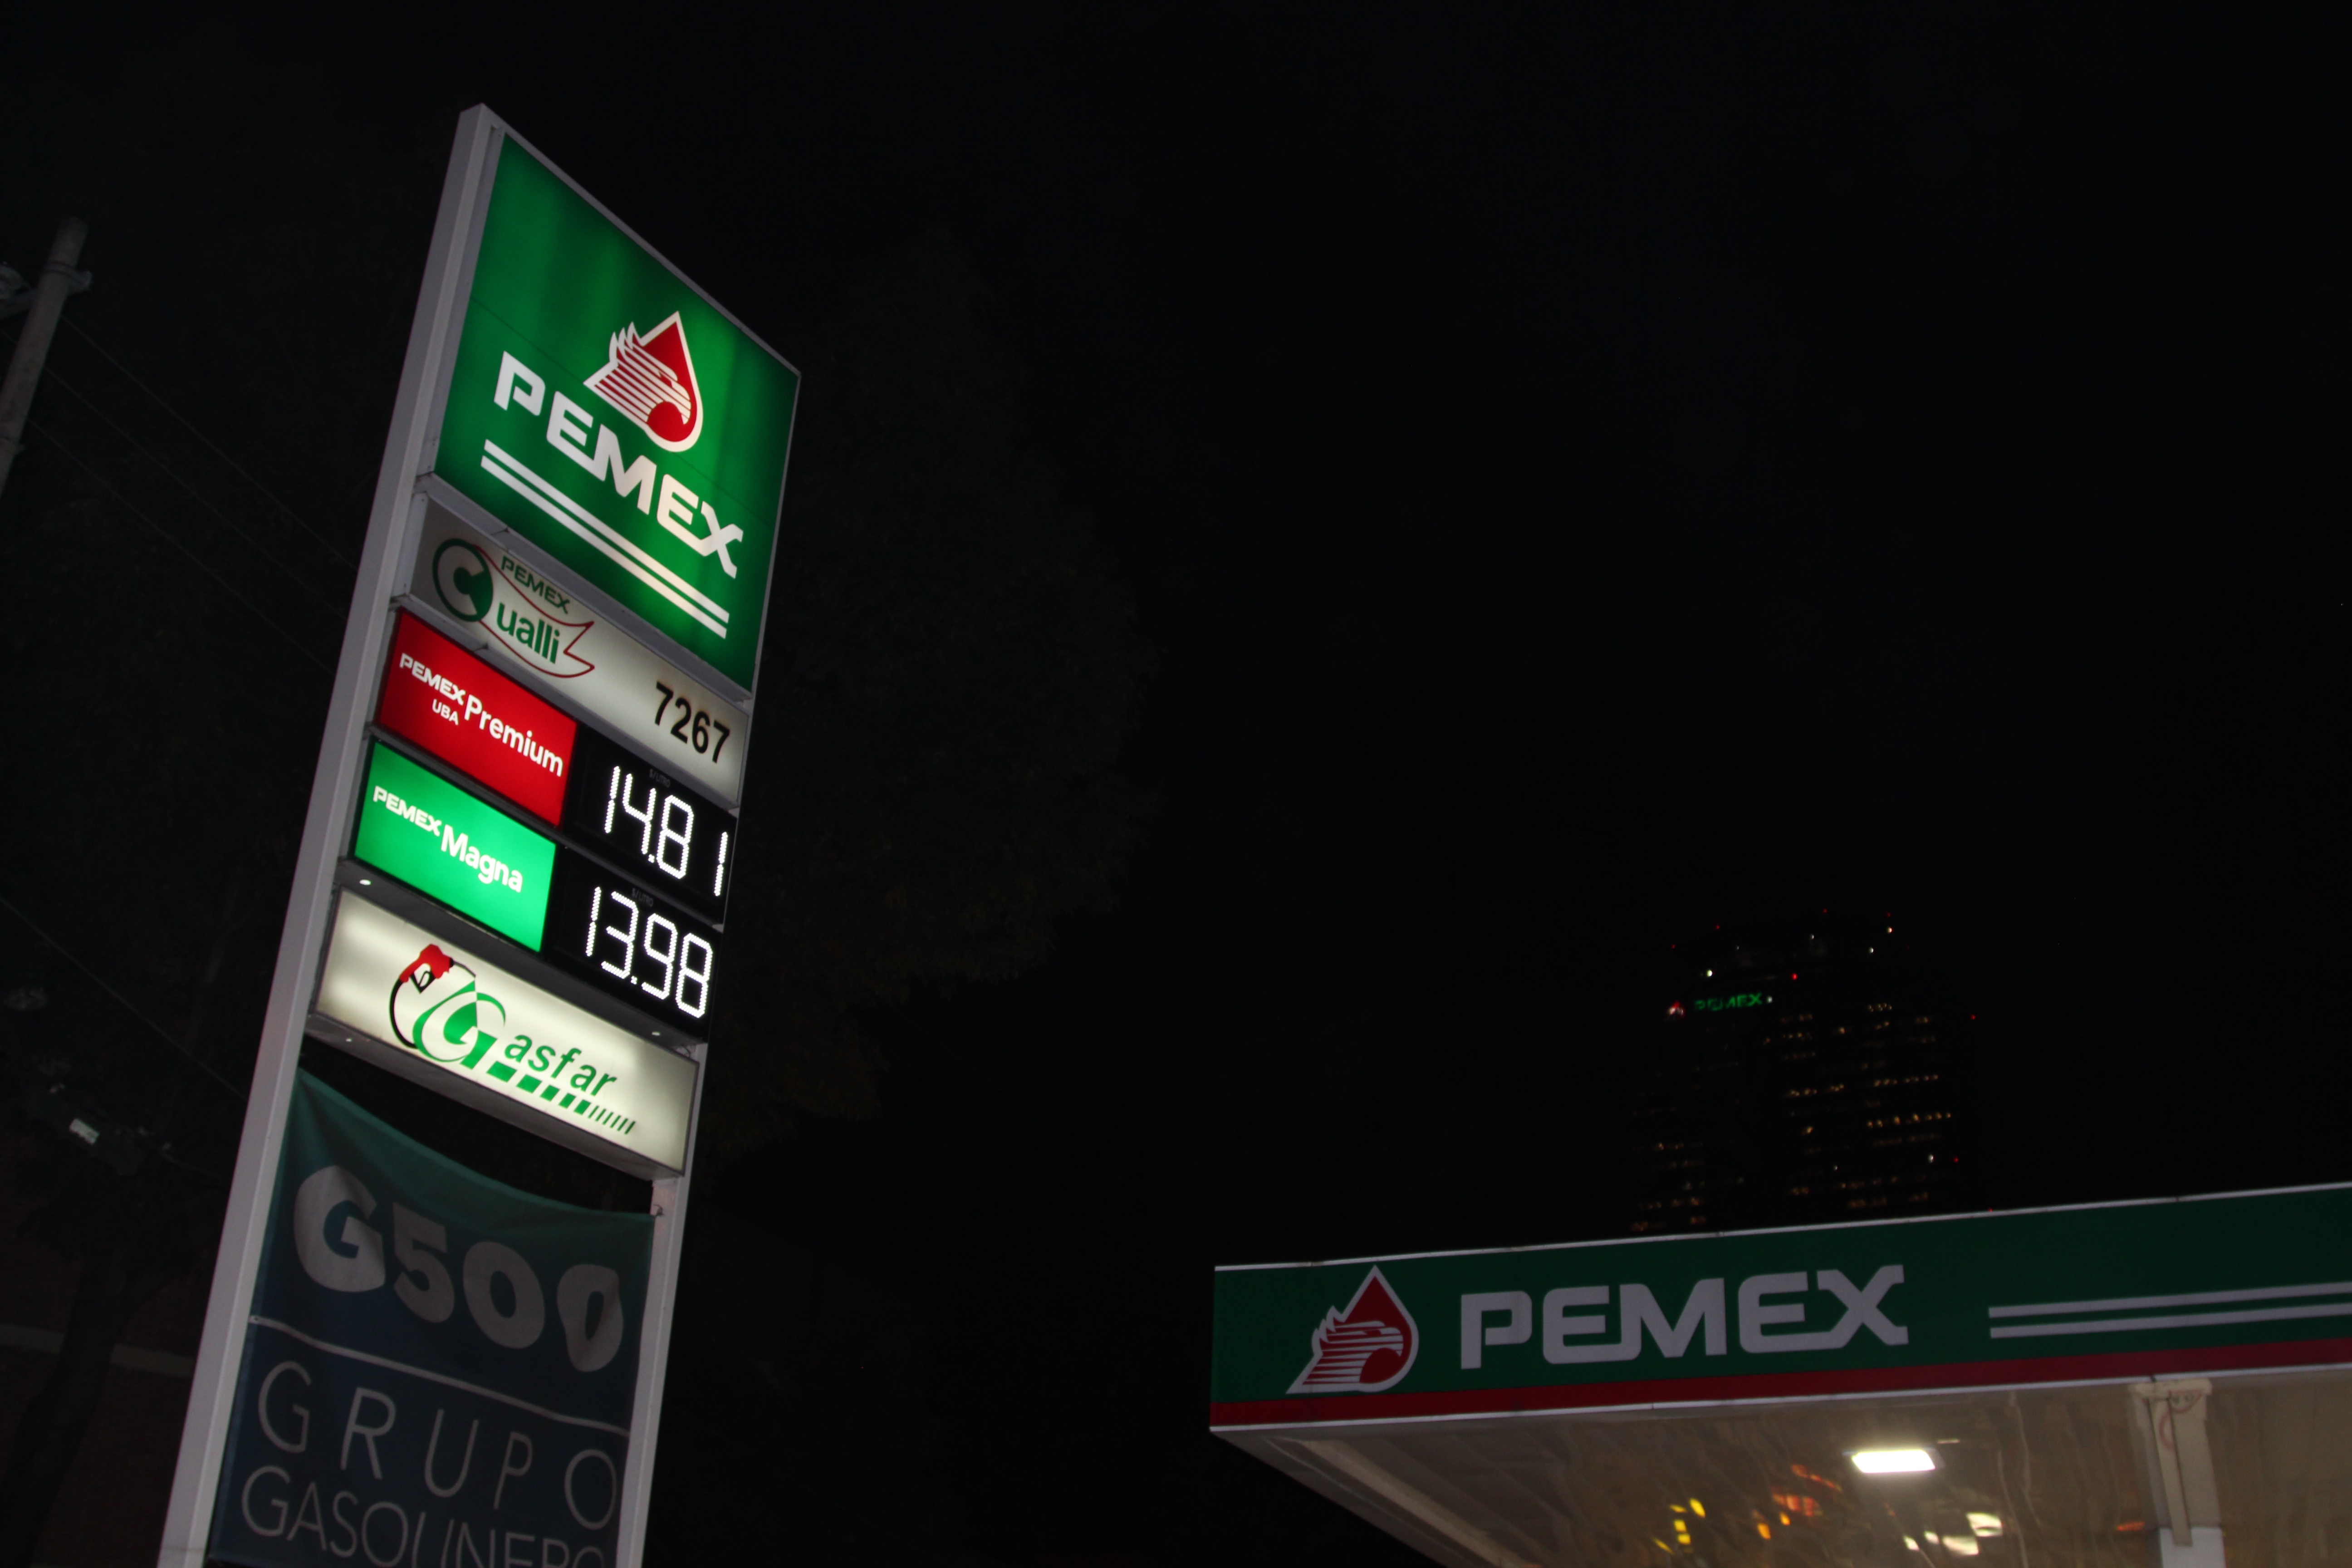 A Pemex gas station in front of Pemex headquarters, Mexico City. The state-owned agency is dealing with several challenges as it participates in Mexico’s deregulated energy markets. (photo: Lorne Matalon)